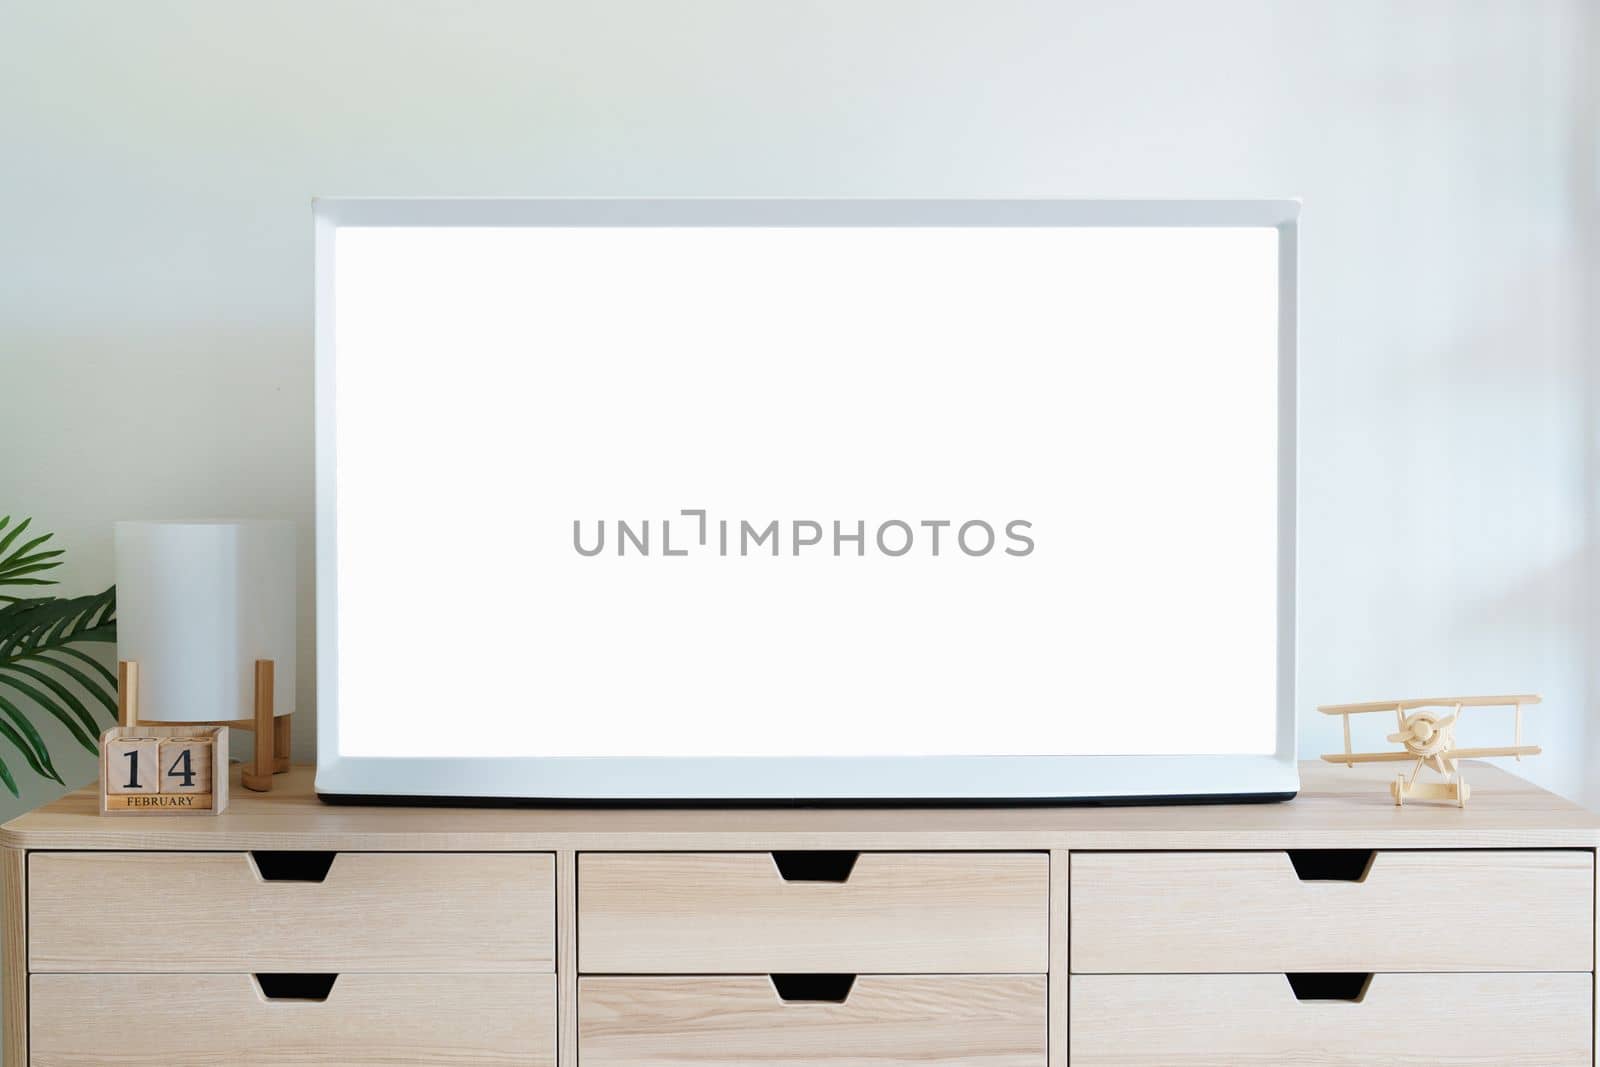 White screen TV that can bring messages or advertising media to put.